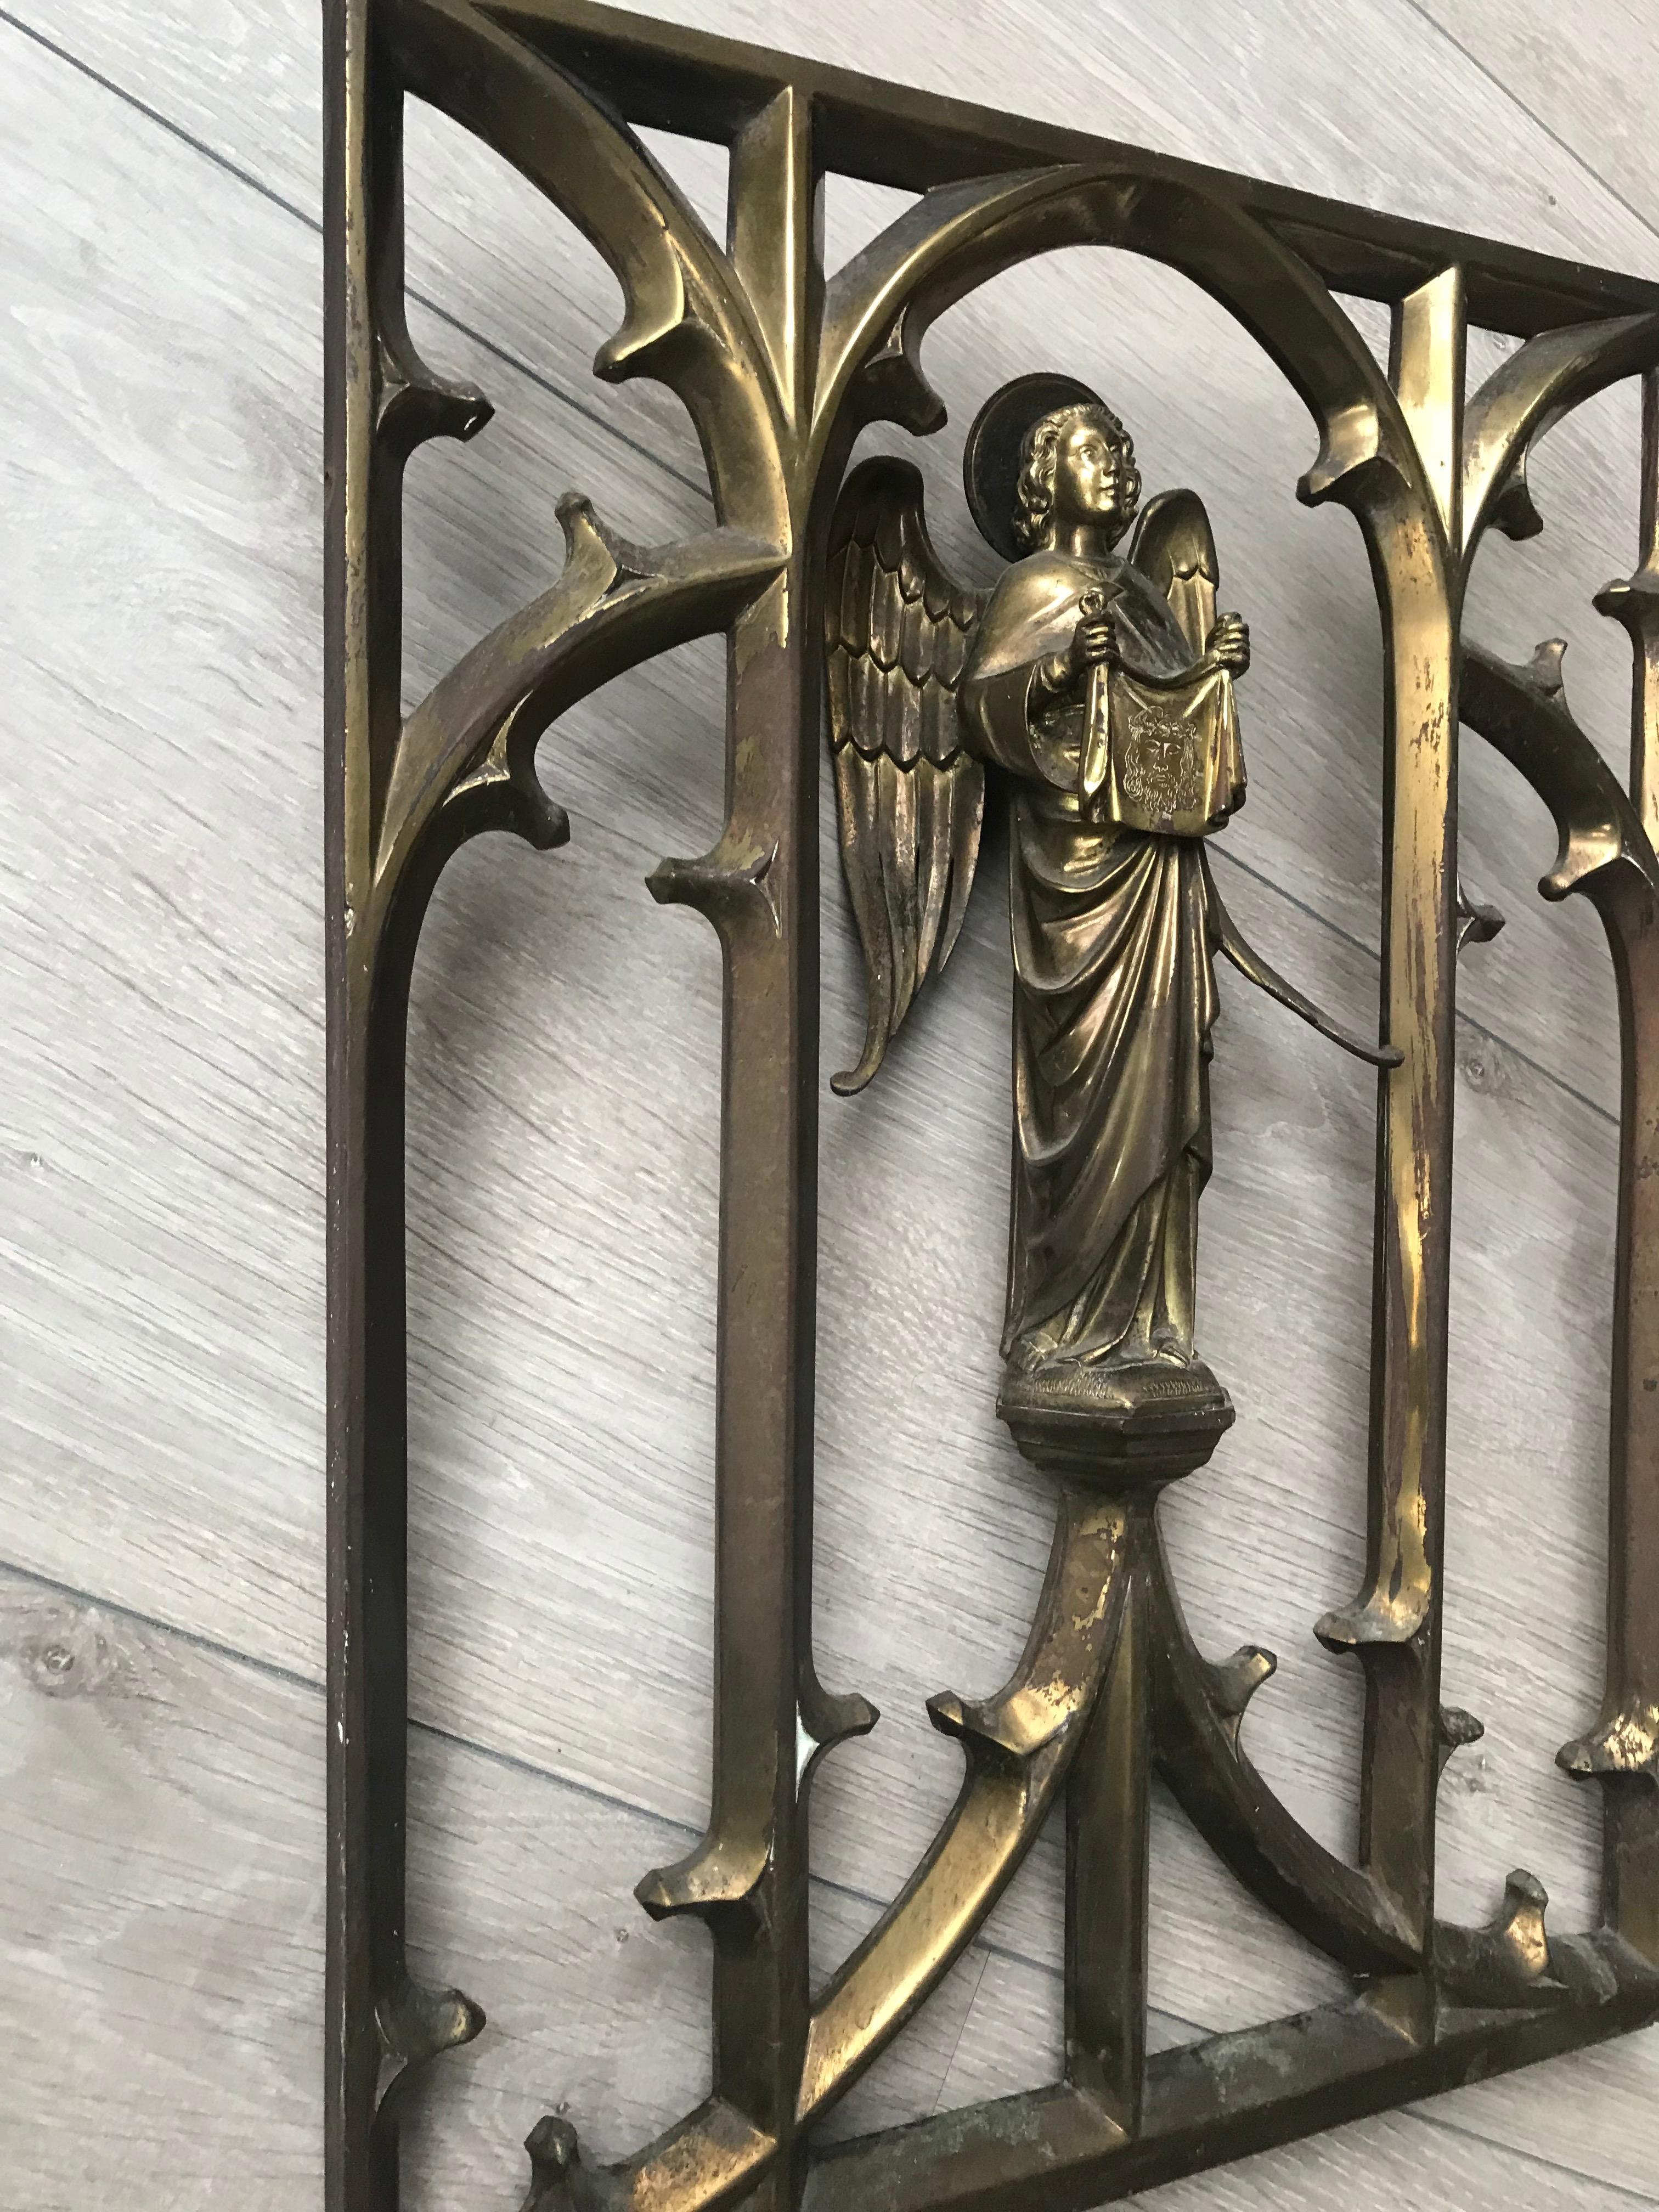 Gothic Revival Late 1800 Bronze Window Frame Winged Angel Sculpture Presenting Veronica's Veil